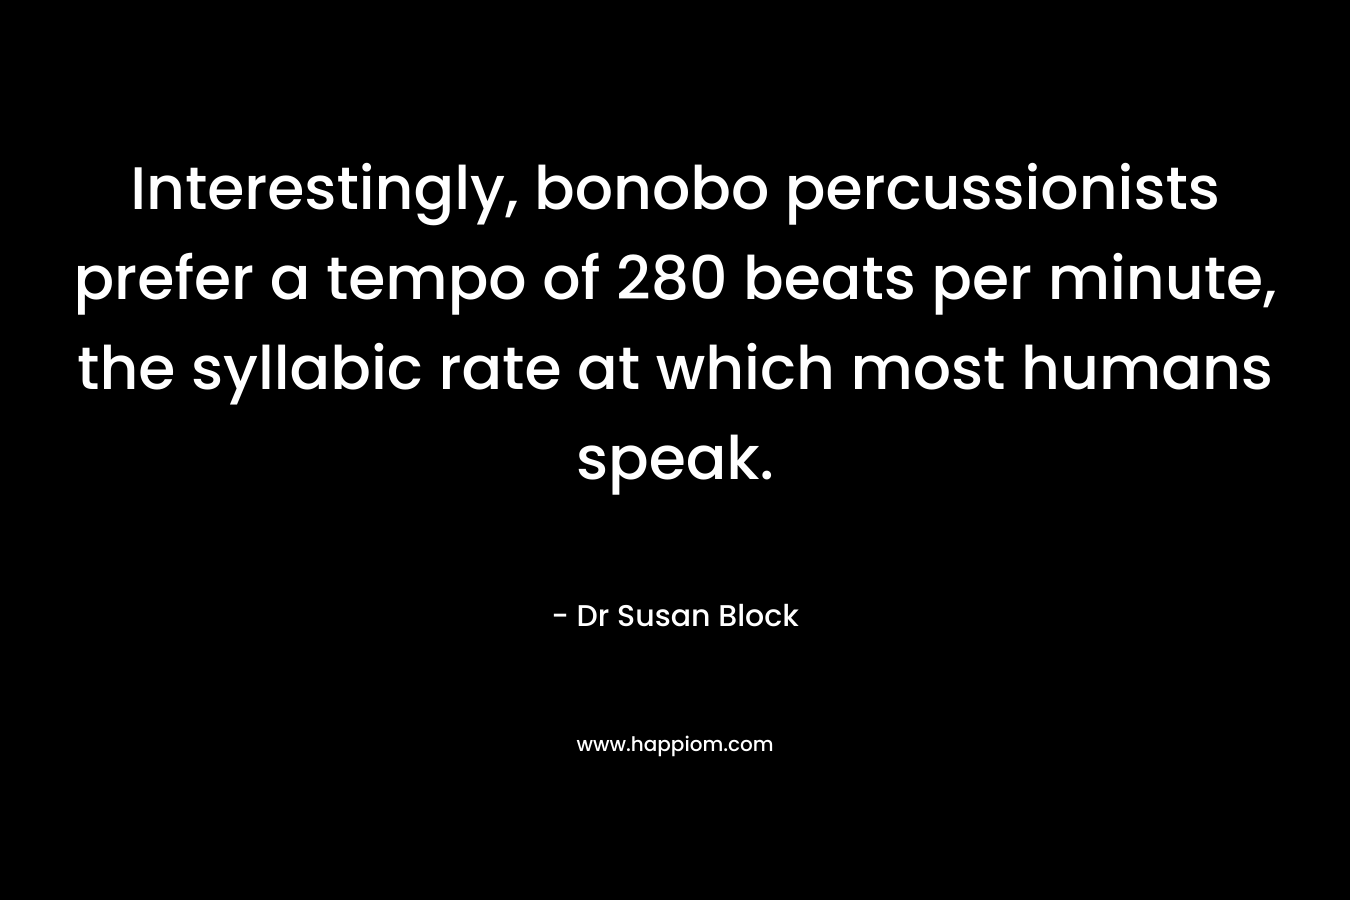 Interestingly, bonobo percussionists prefer a tempo of 280 beats per minute, the syllabic rate at which most humans speak. – Dr Susan Block